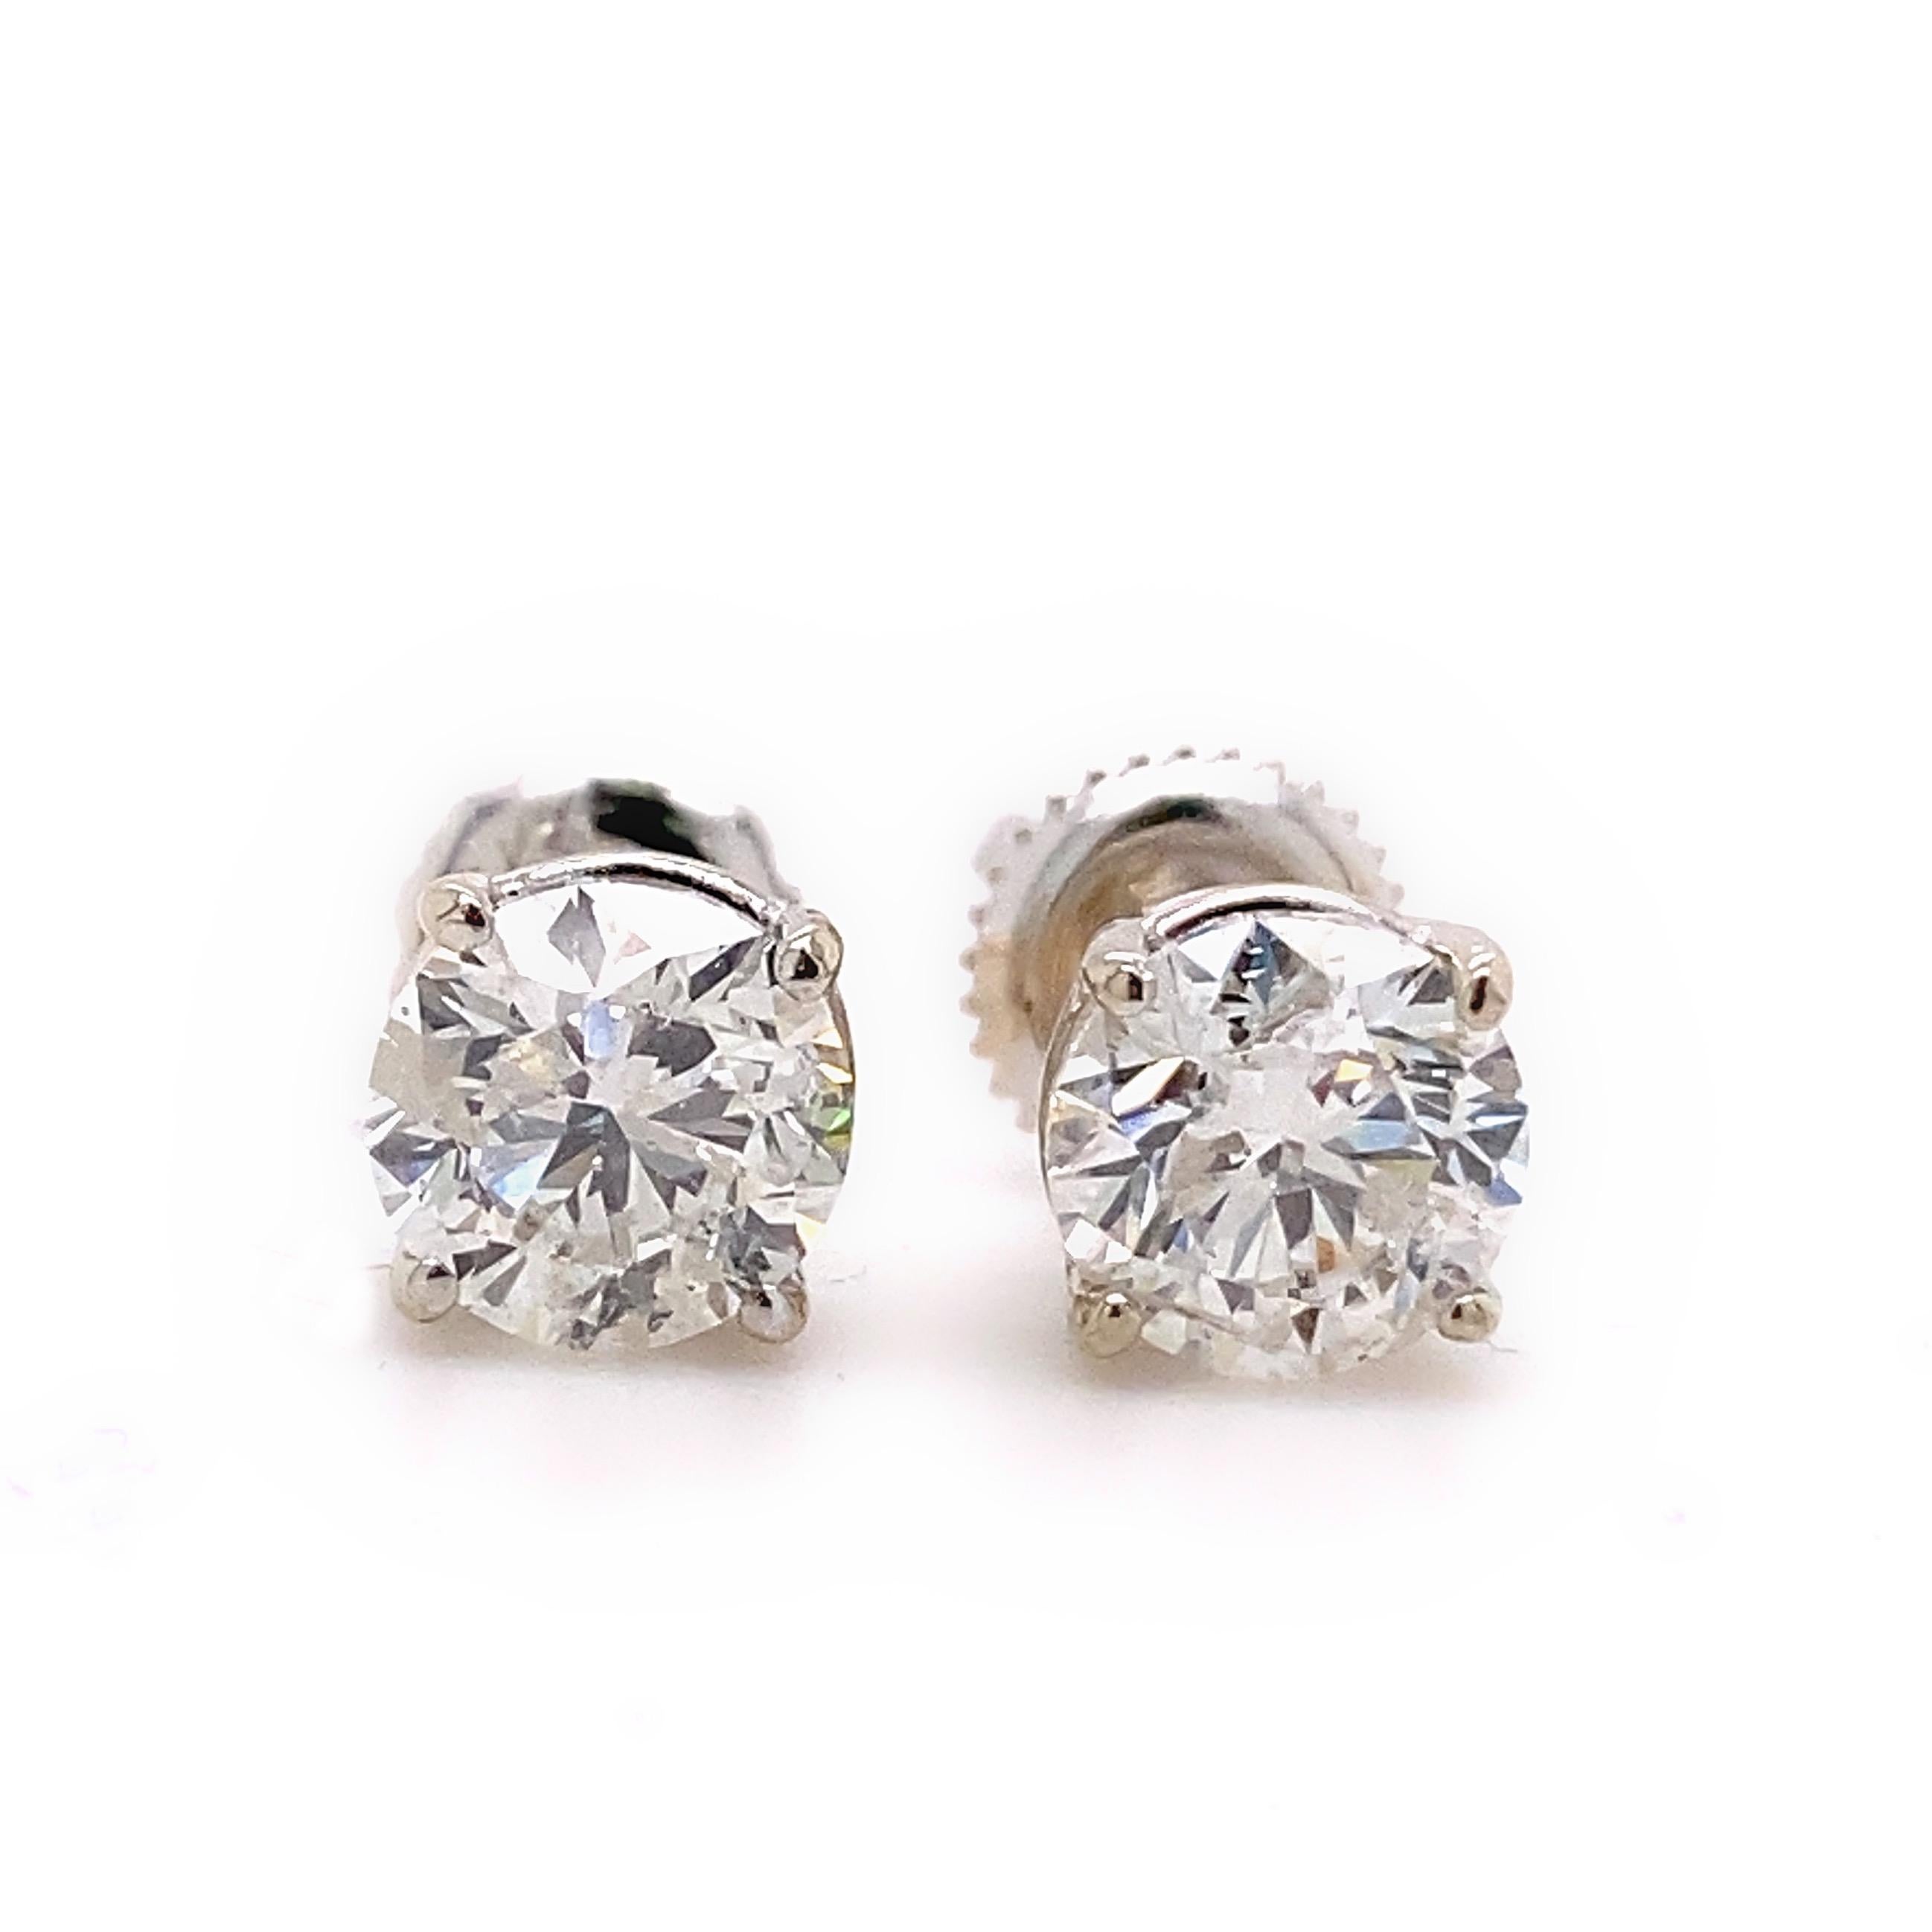 Round Solitaire Diamond Stud Earrings 1.82 Tcw Set in 14kt White Gold In Excellent Condition For Sale In San Diego, CA